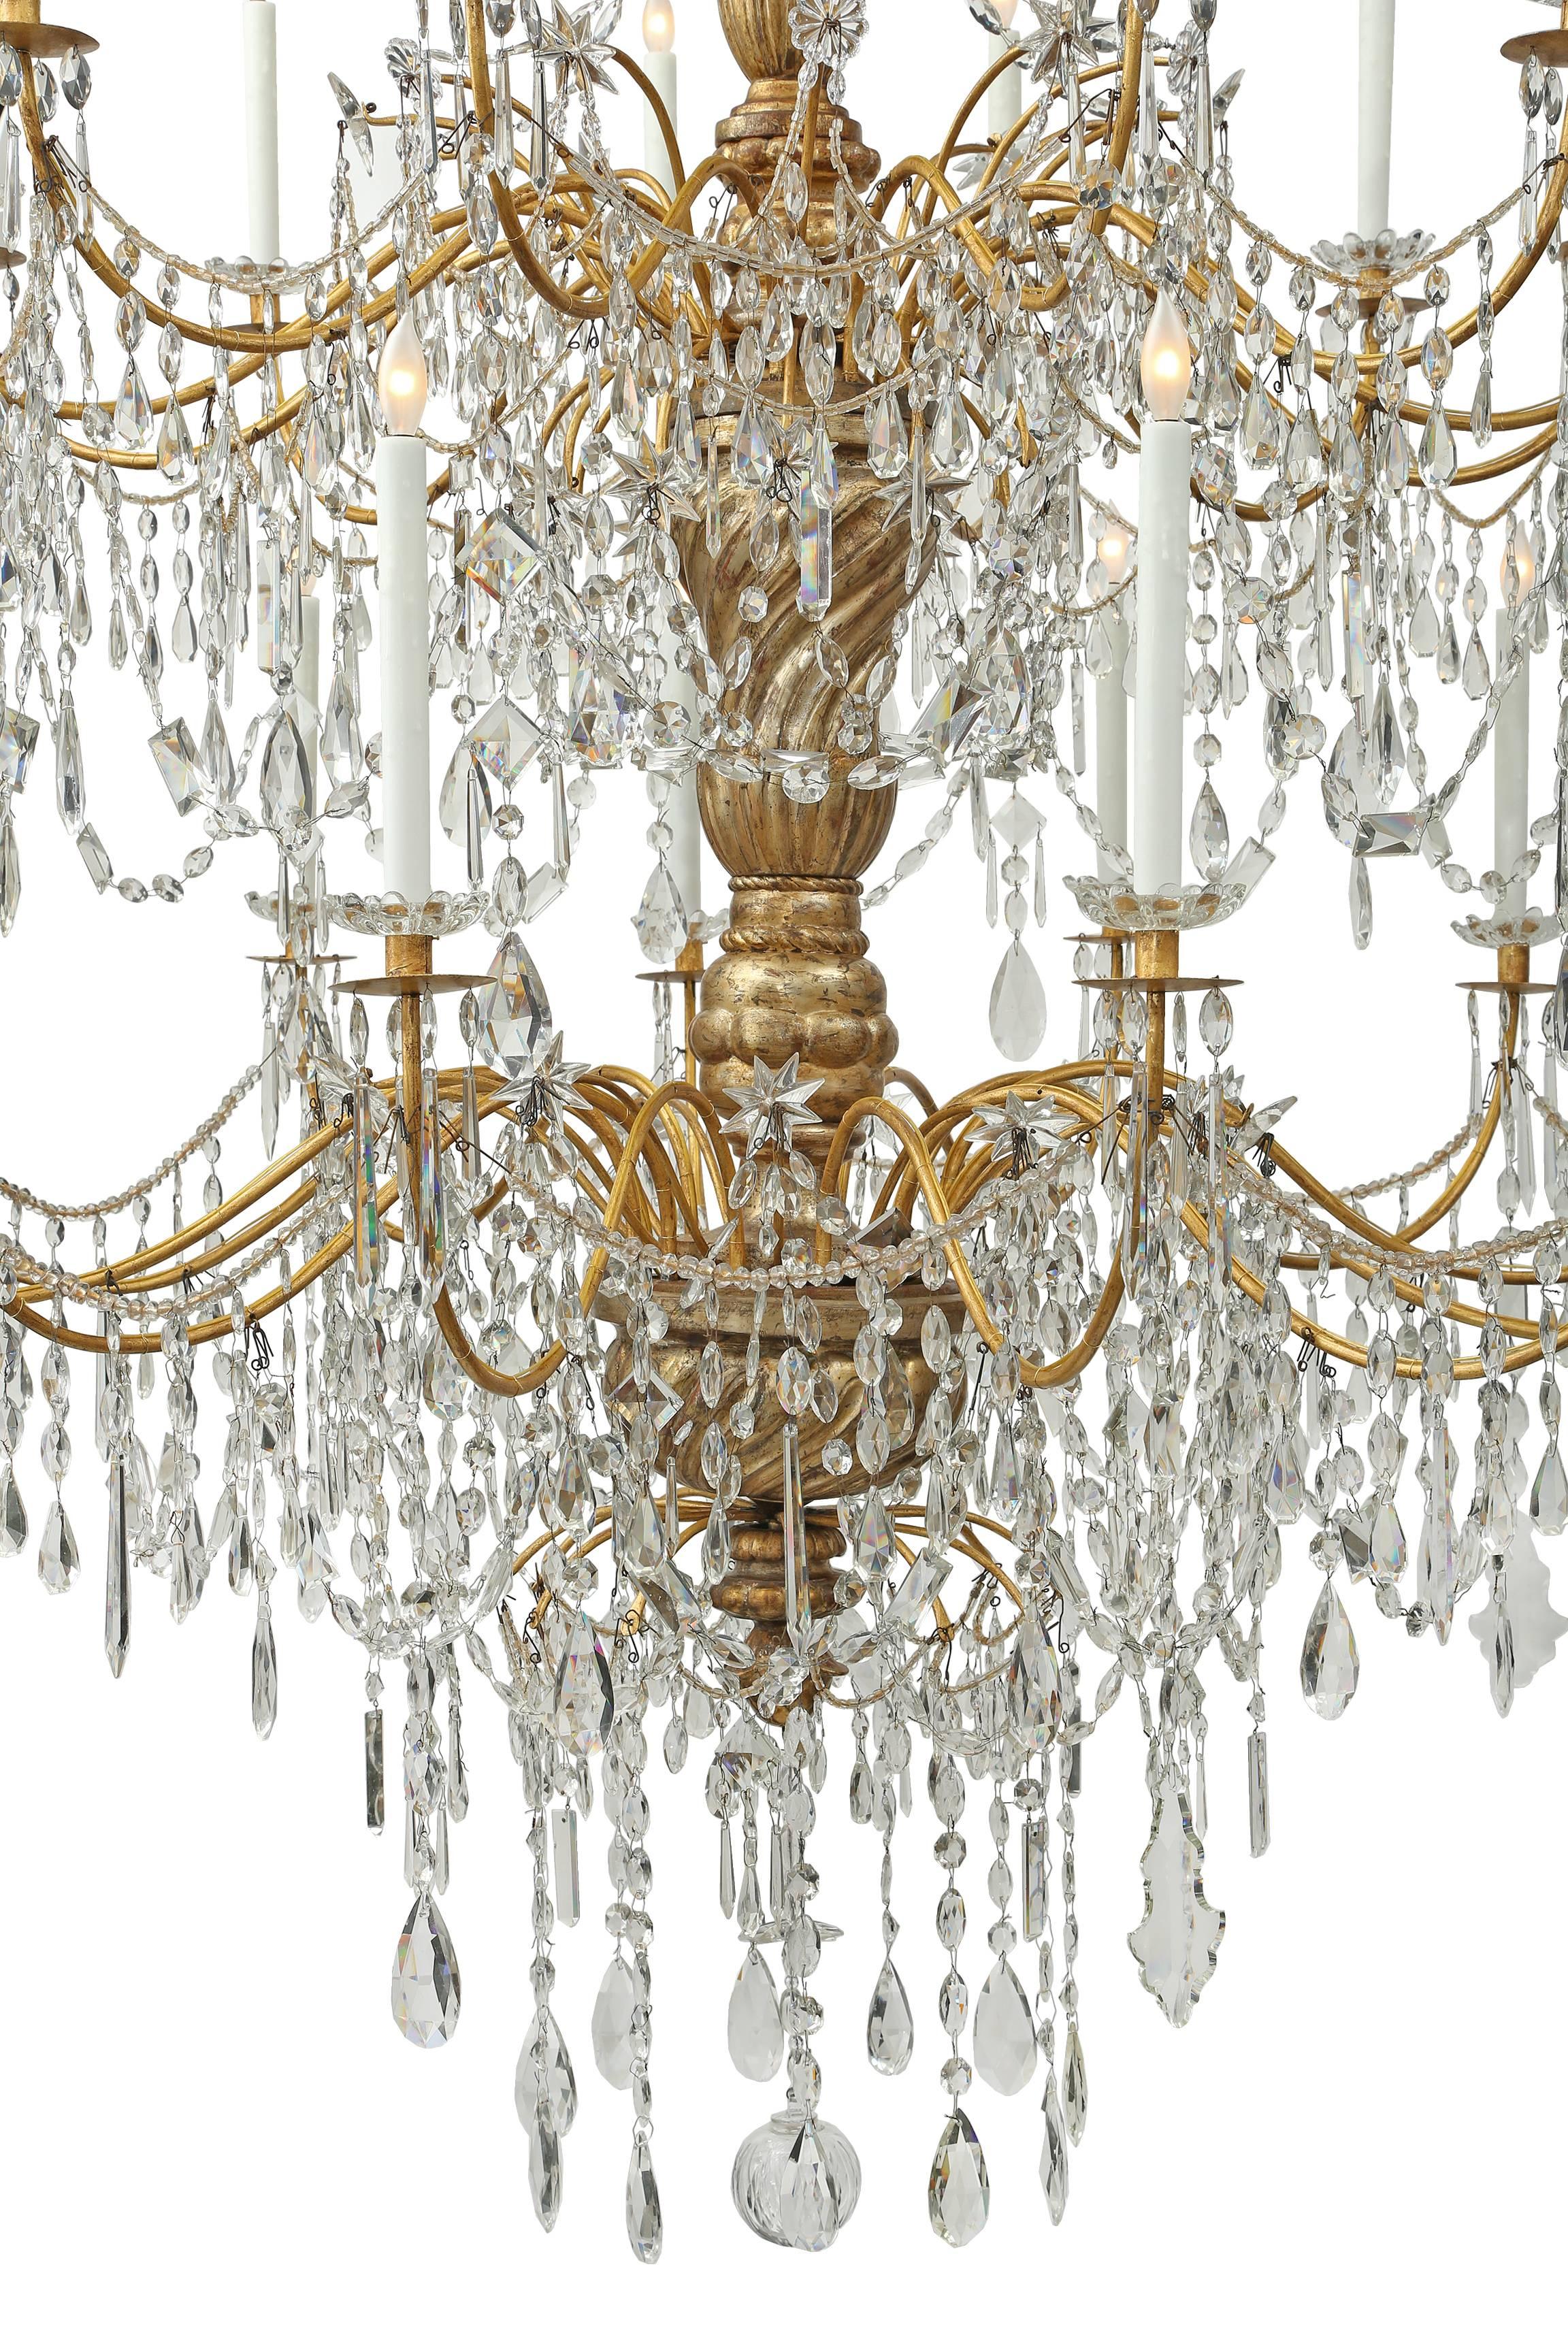 A palatial Italian 18th century Genovese twenty four light, two tier chandelier. This monumental chandelier is centered by an elegant hand blown glass ball encircled by cut crystal pendants. Each tier displays twelve S scrolled gilt metal arms with